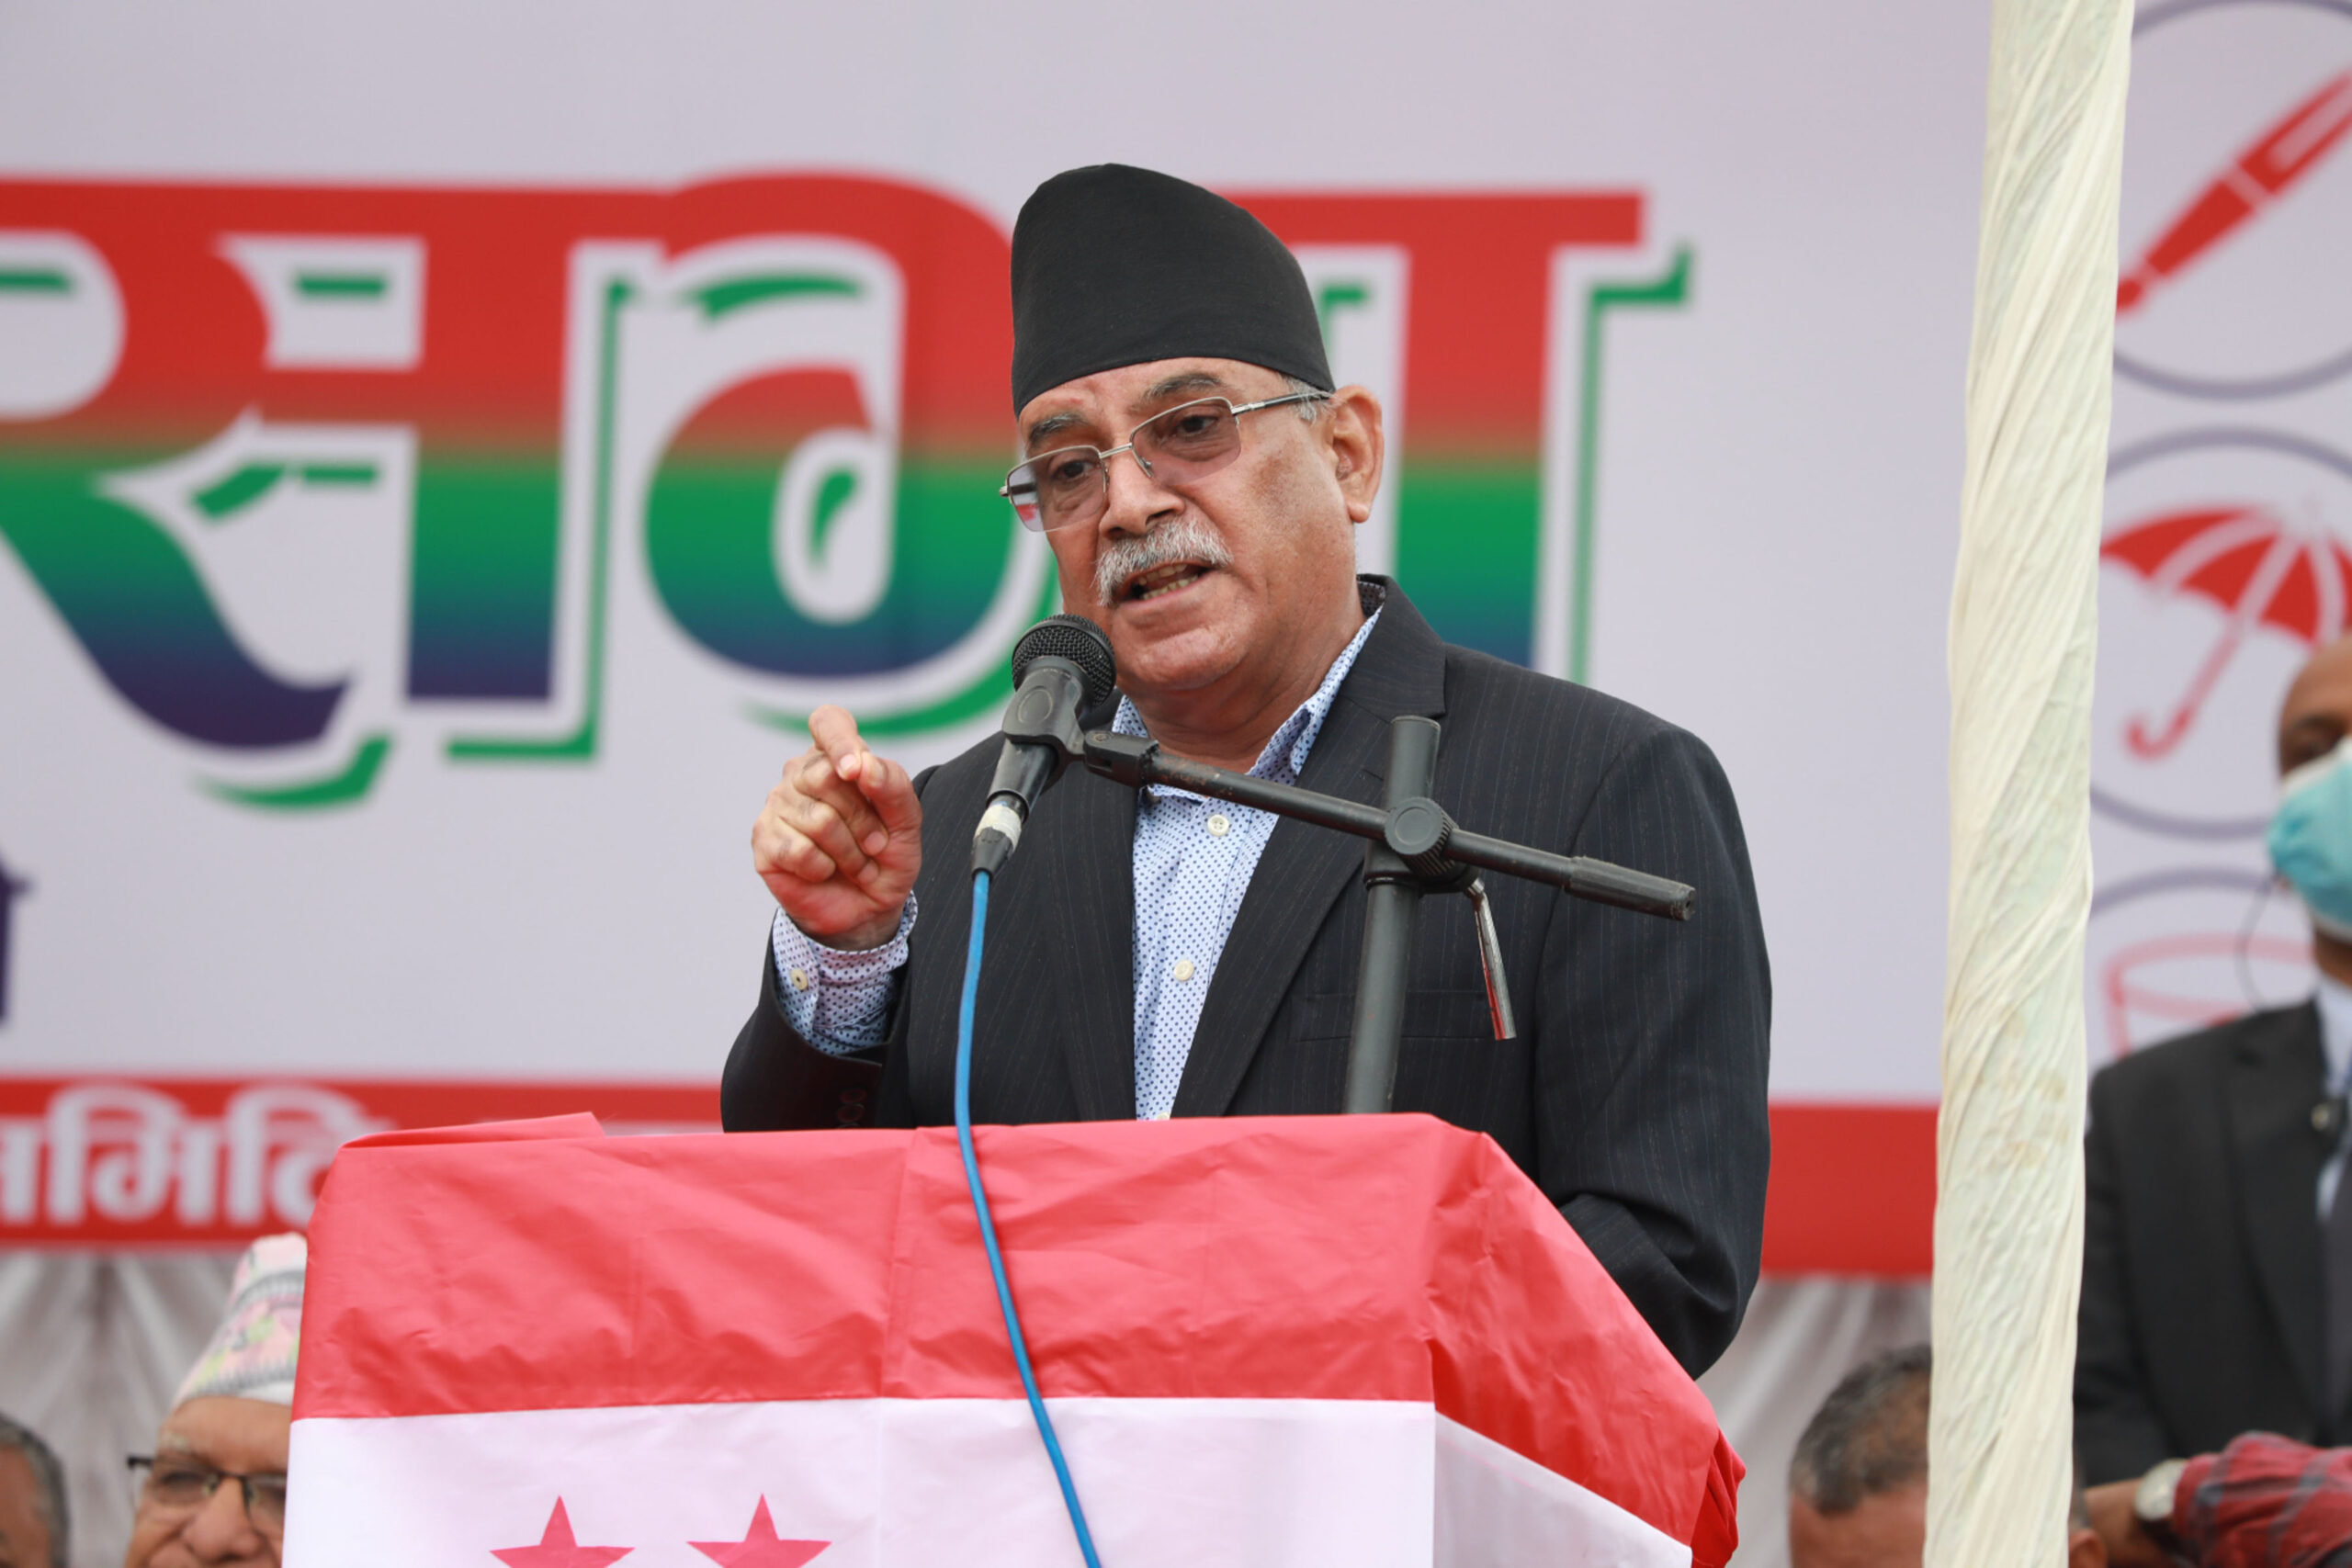 Prachanda objects to portrayal of women candidates merely as daughters and wives